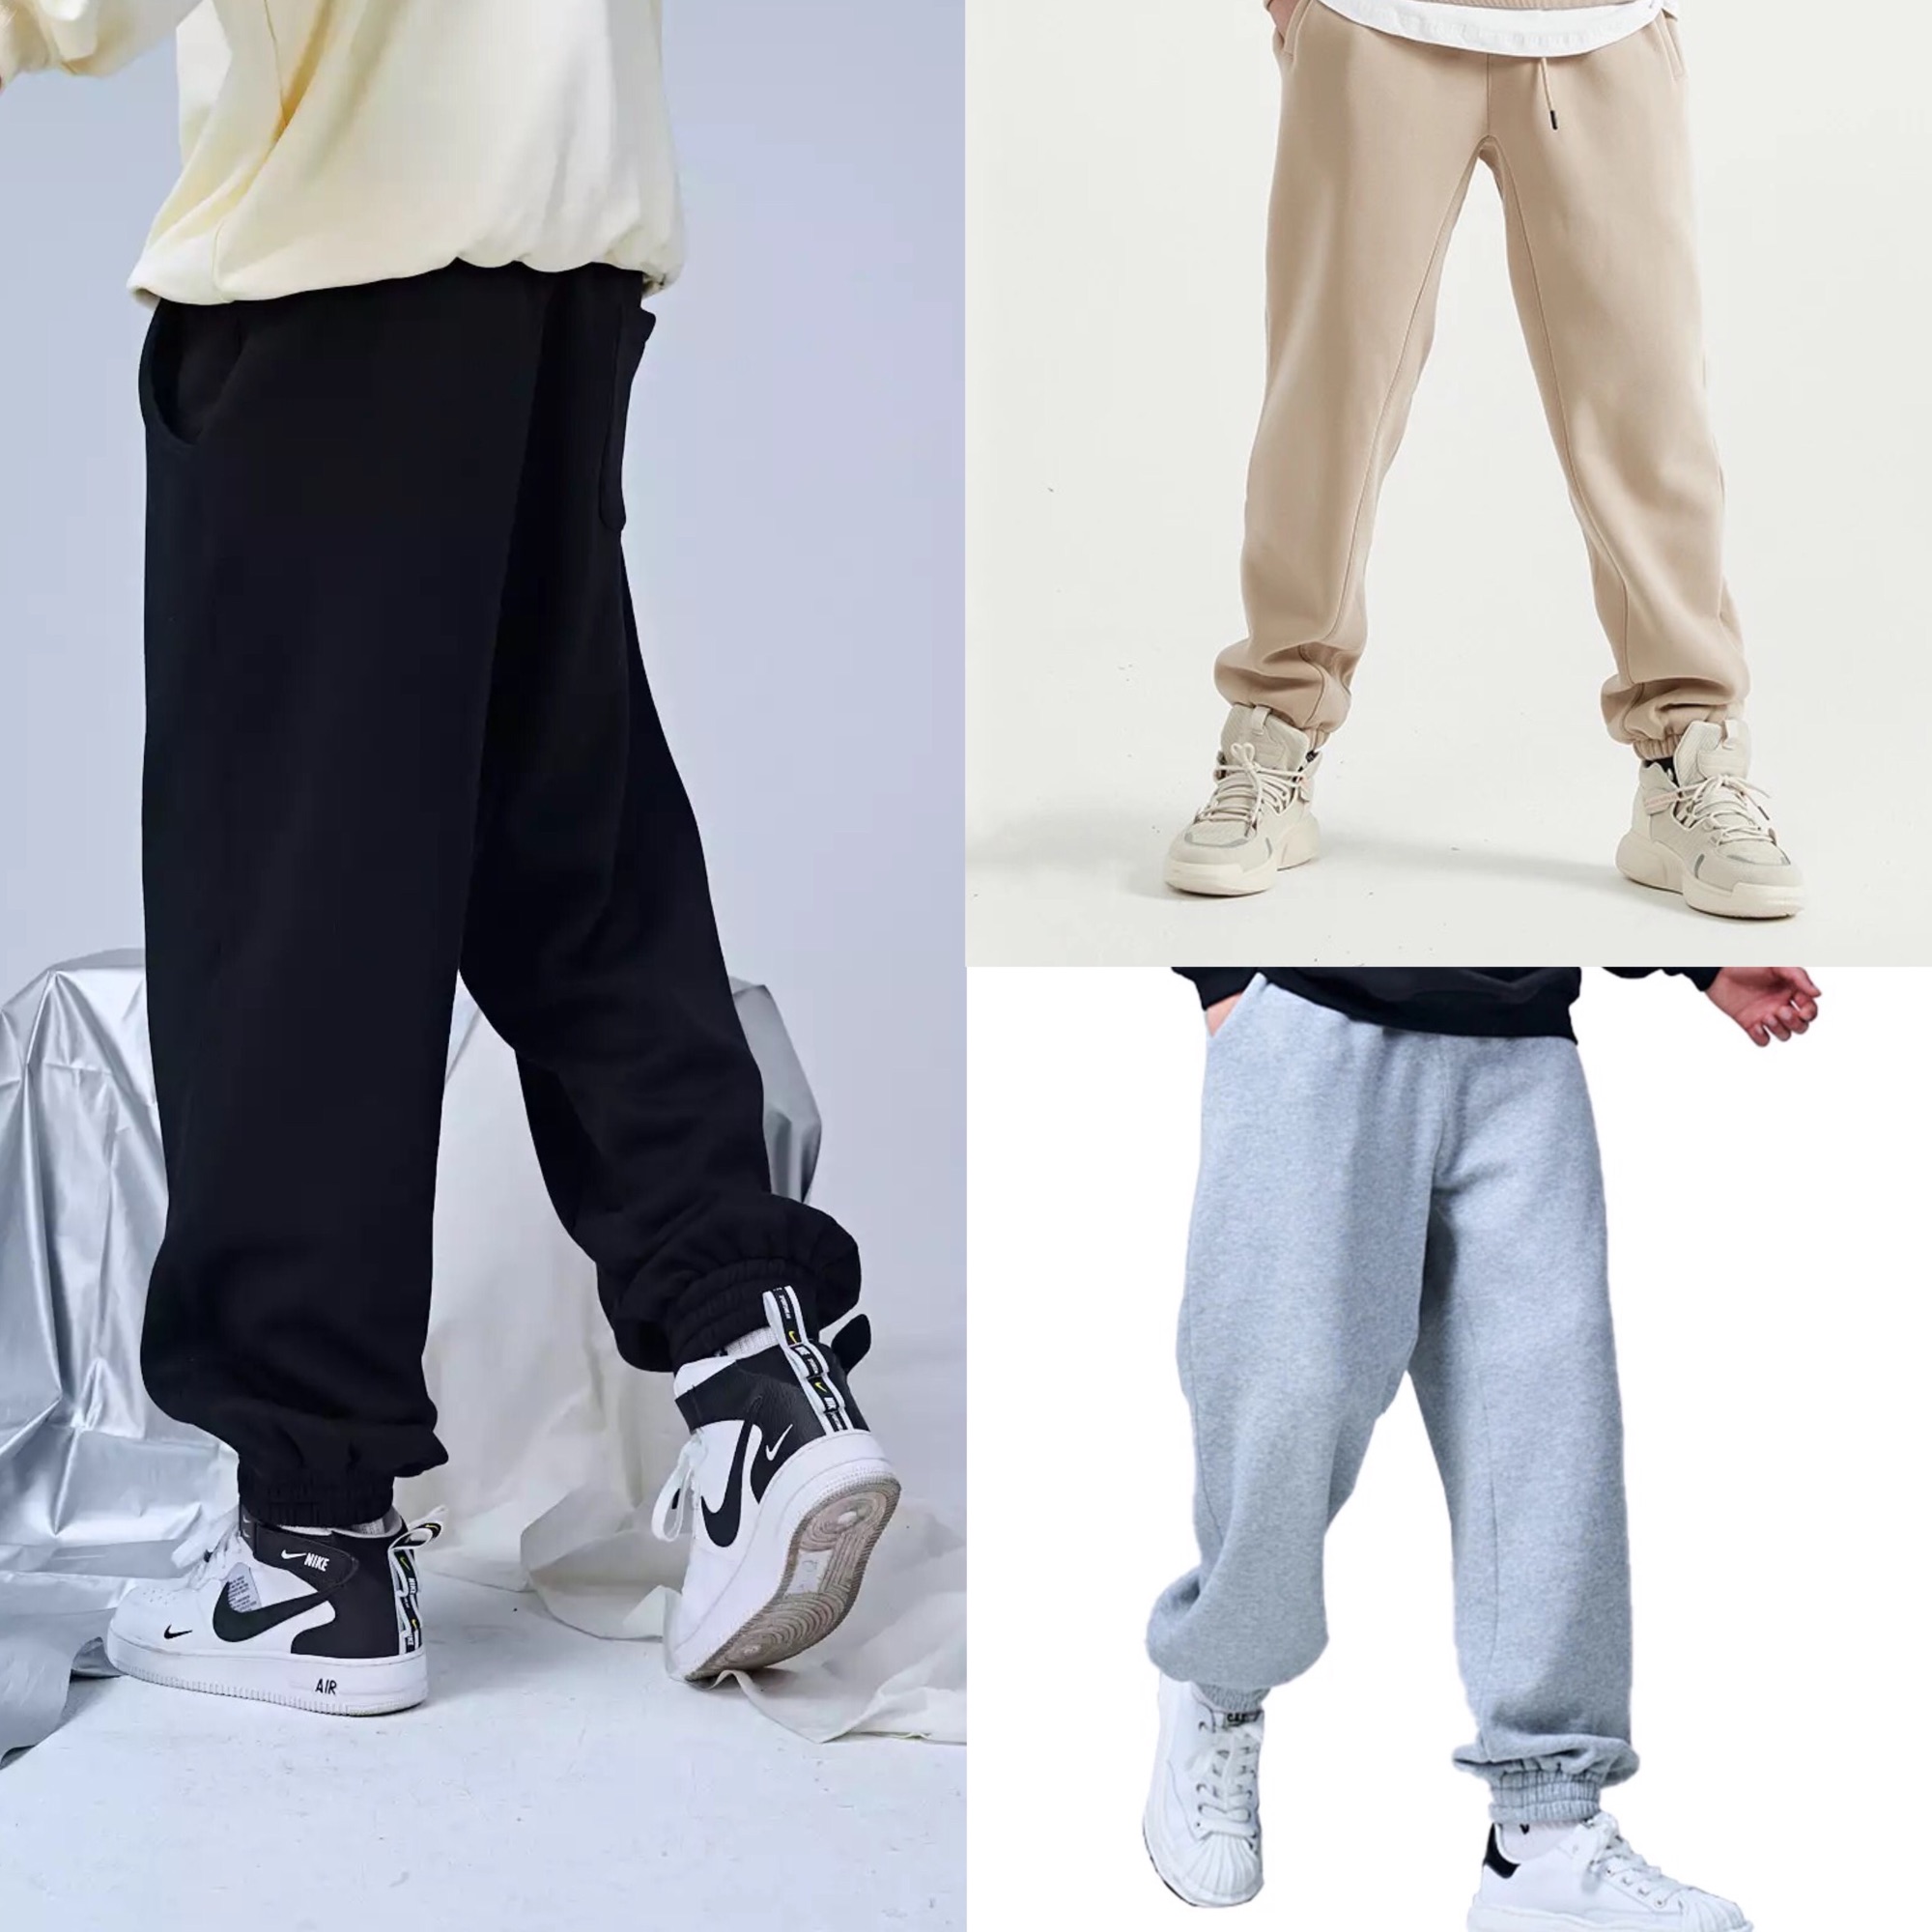 Mens High Waist Baggy Sweat Pants - Track Pants with 2 Side